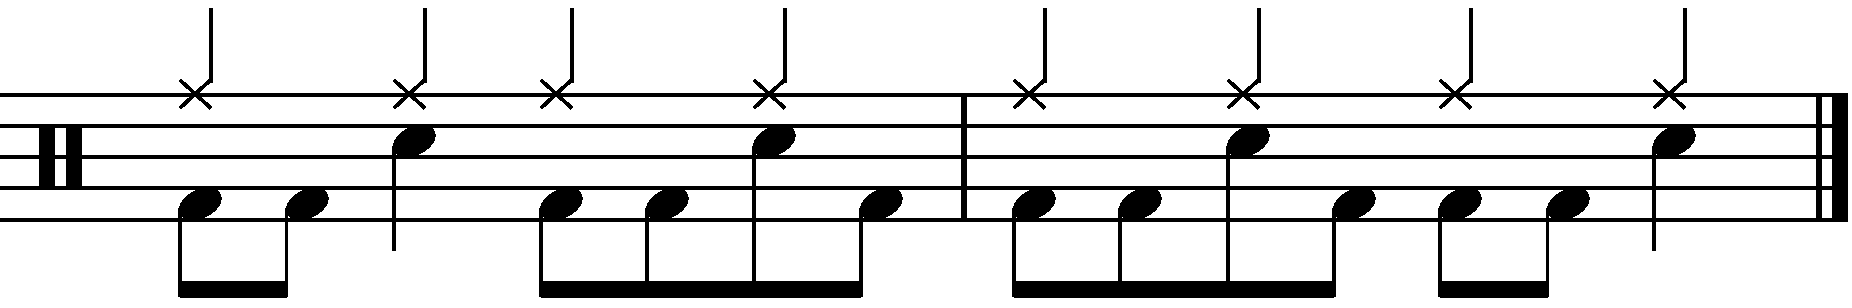 2 Bar Grooves - Example 2e